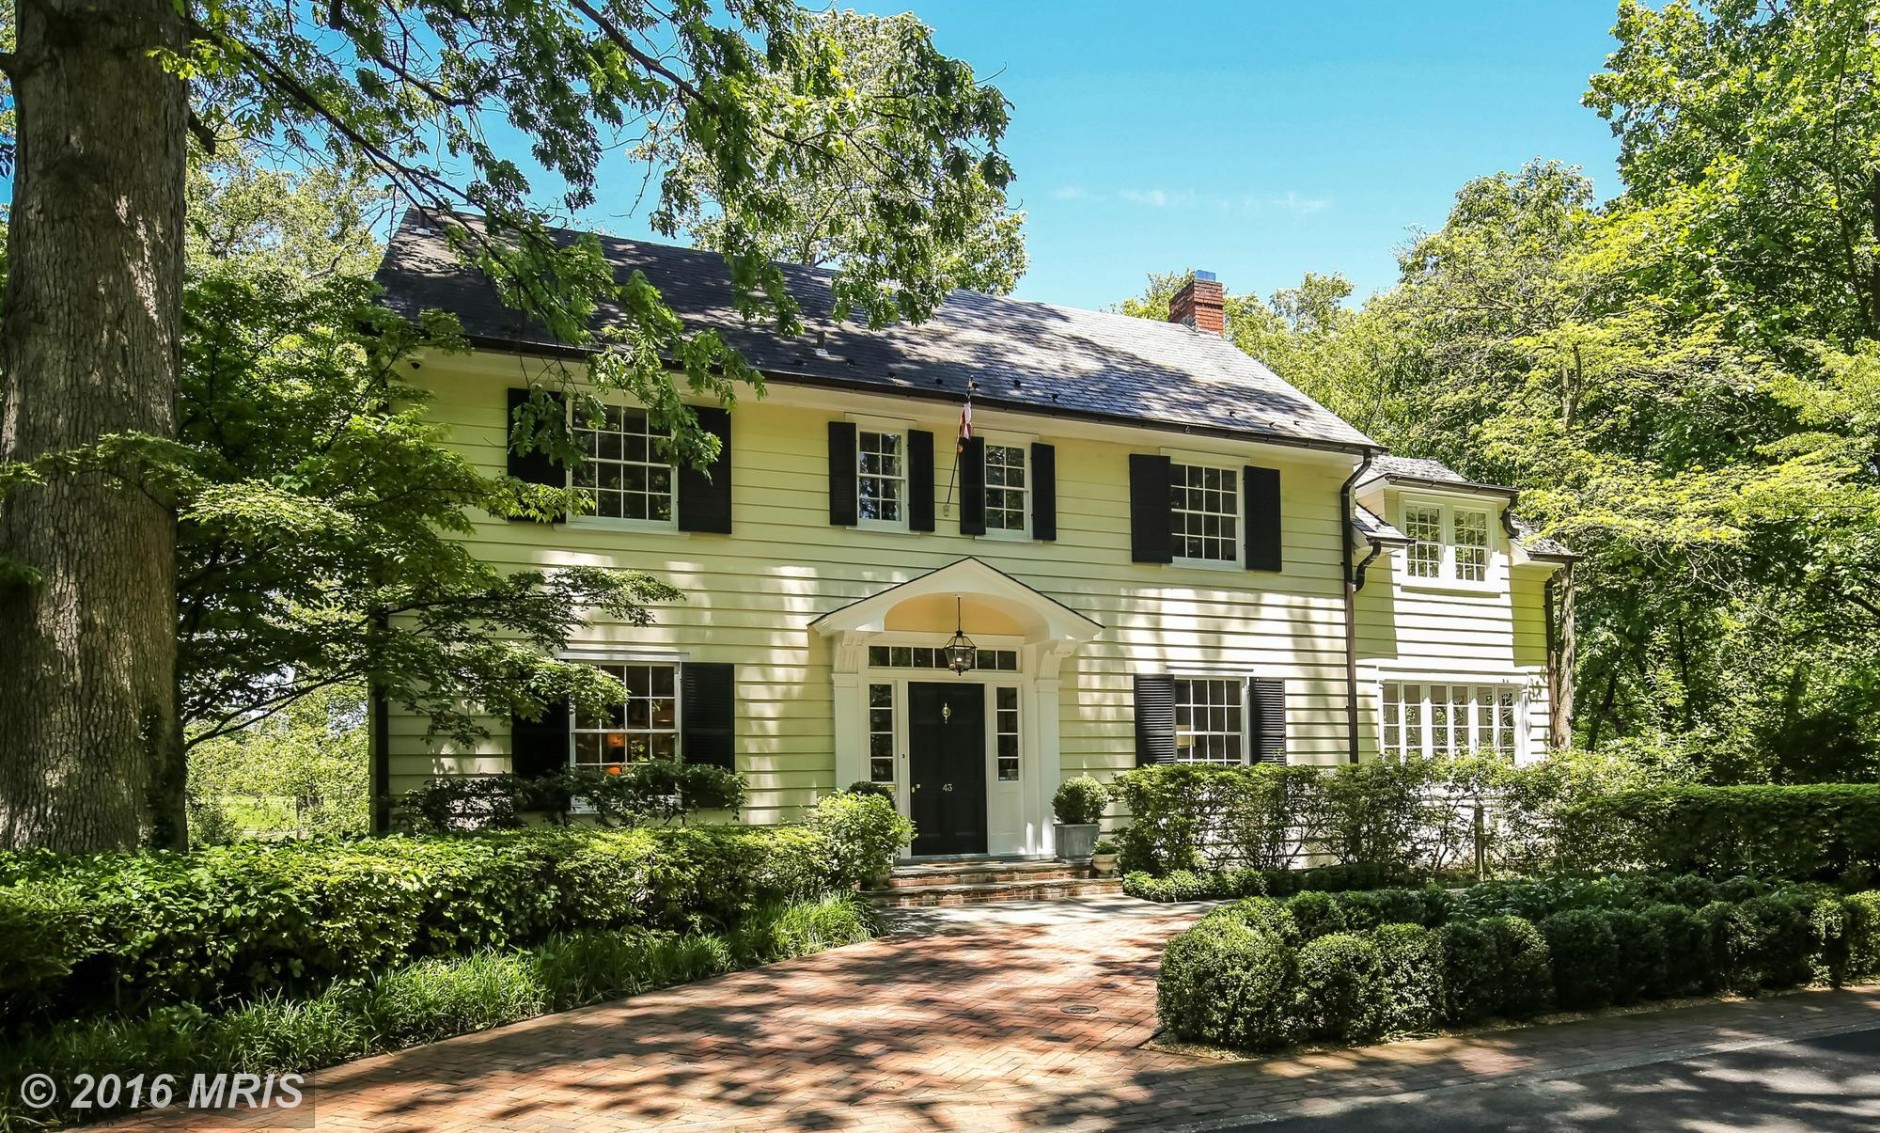 11. $2,900,000
$3 W. Lenox St., Chevy Chase, Maryland
This six-bedroom Colonial has five bathrooms and a half-bath; it was built in 1918. (MRIS)